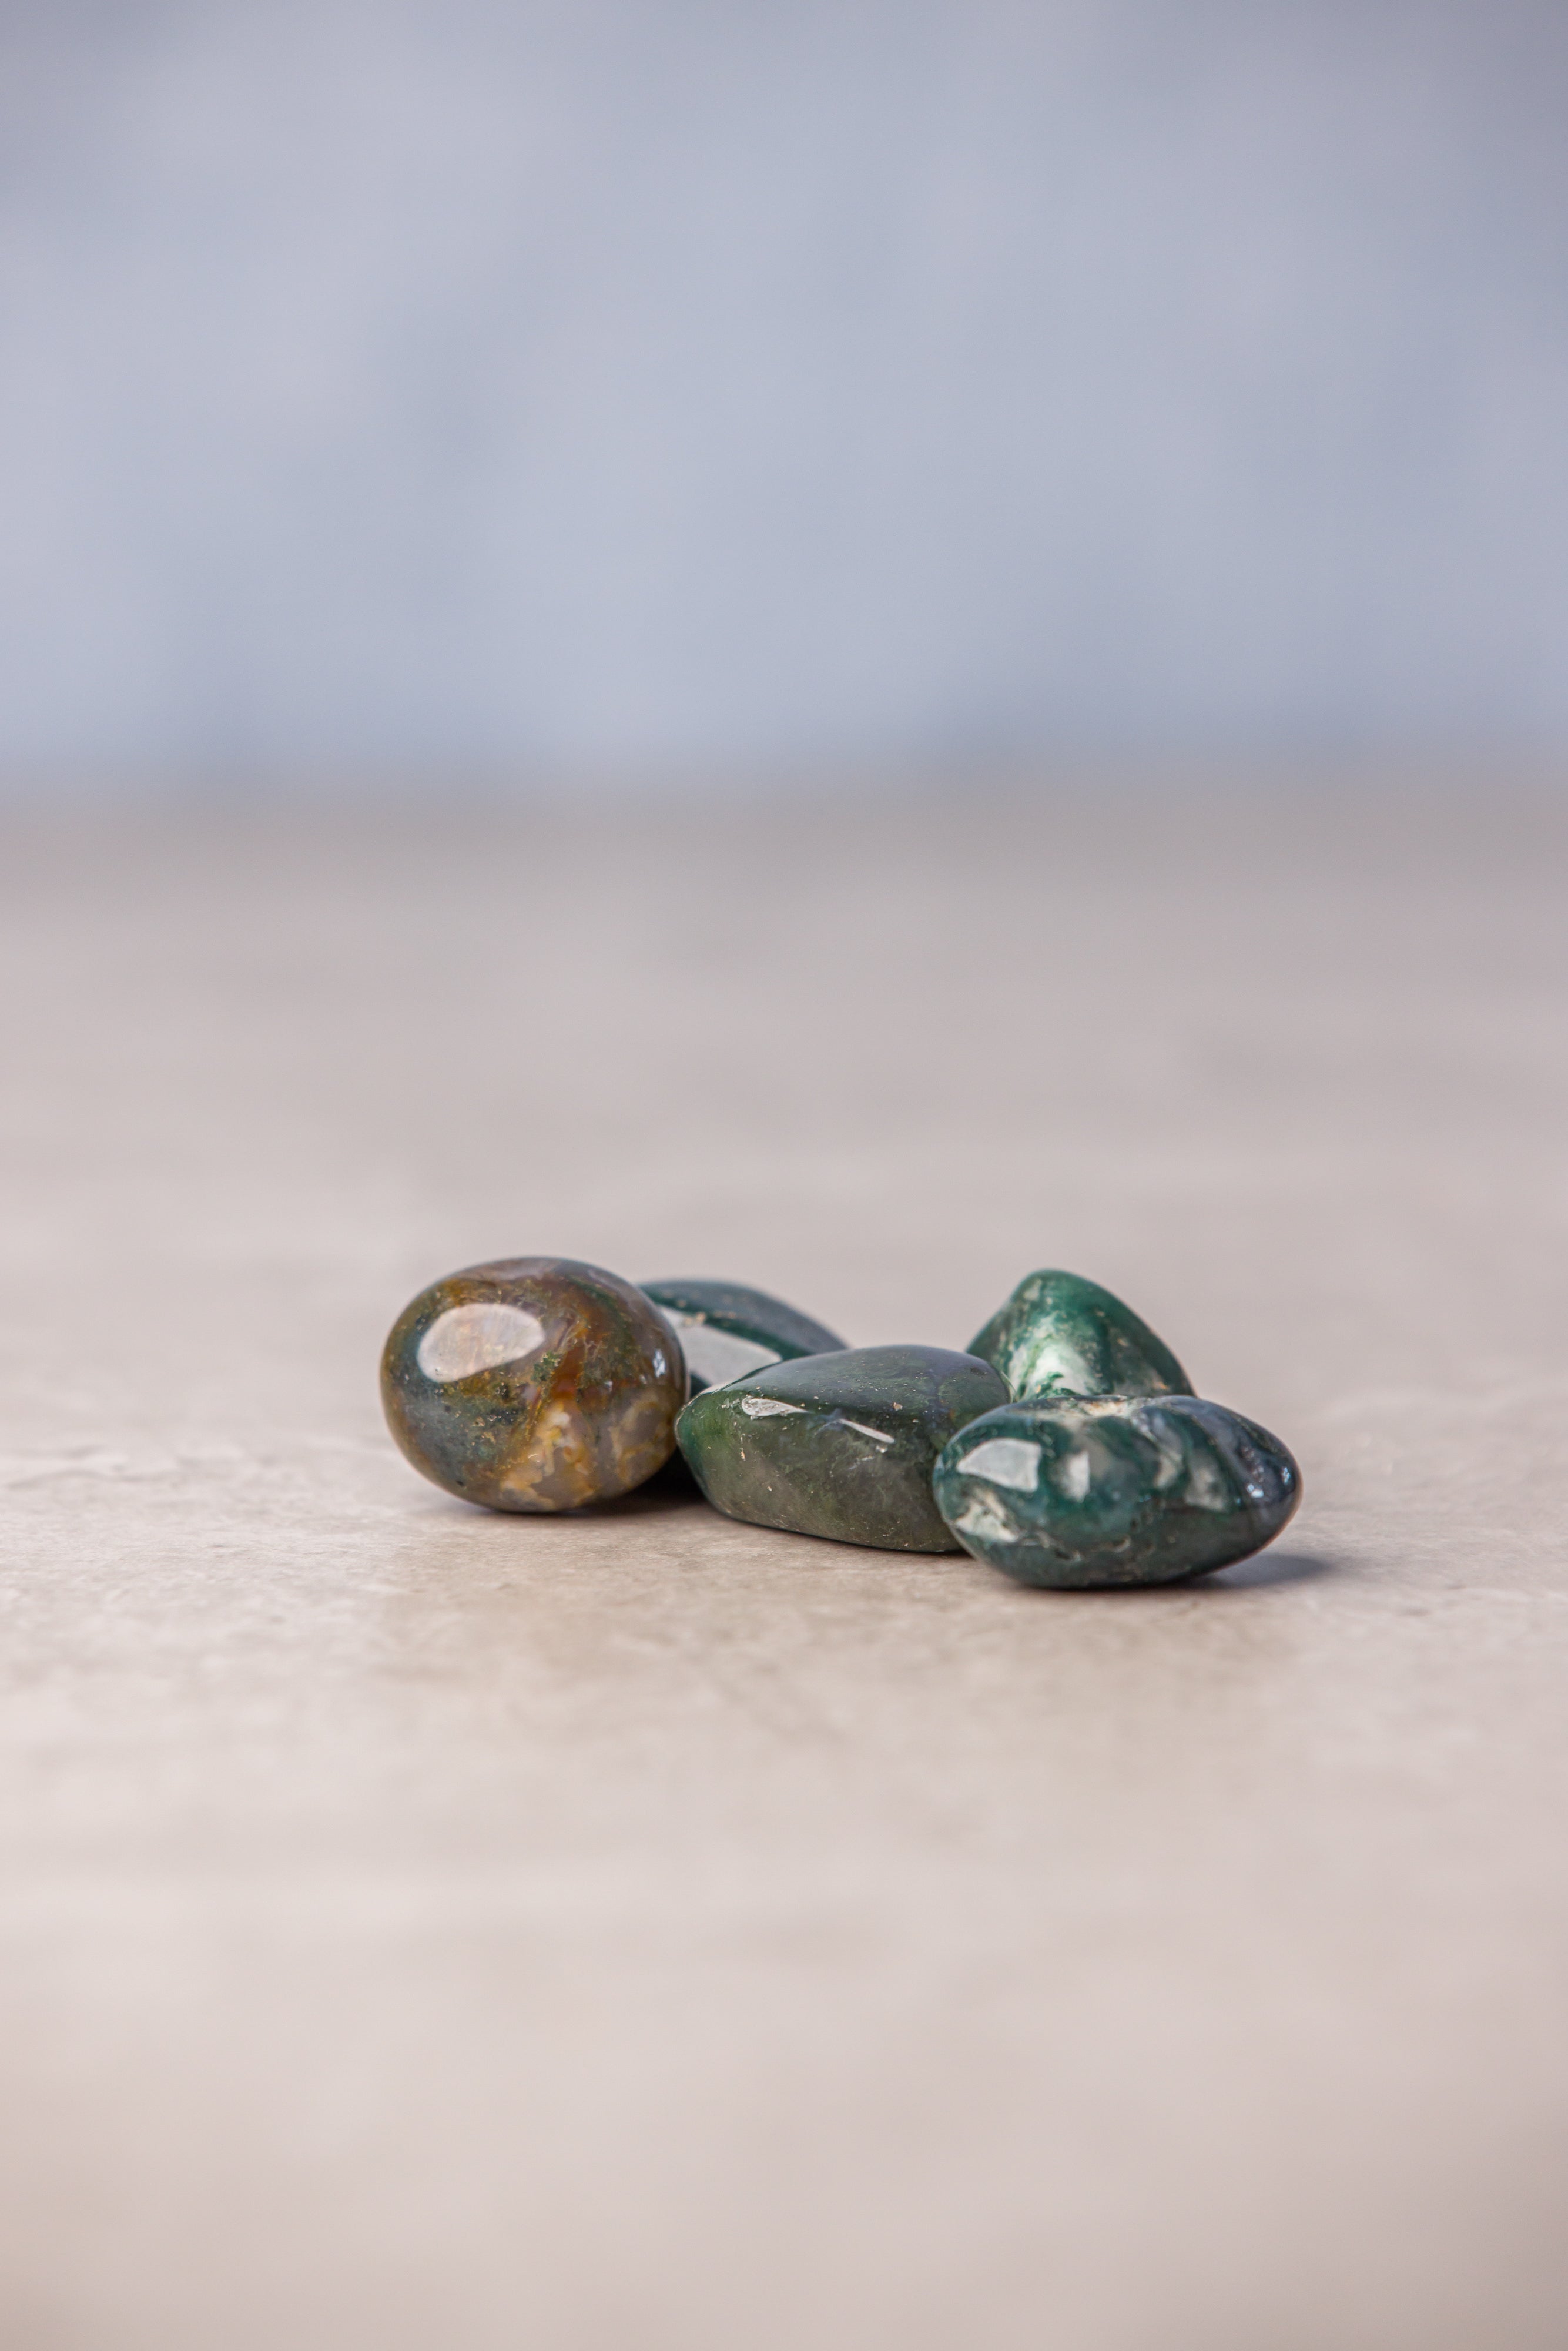 African Turquoise - Transformational Stone for Growth and Positivity - Everyday Rocks